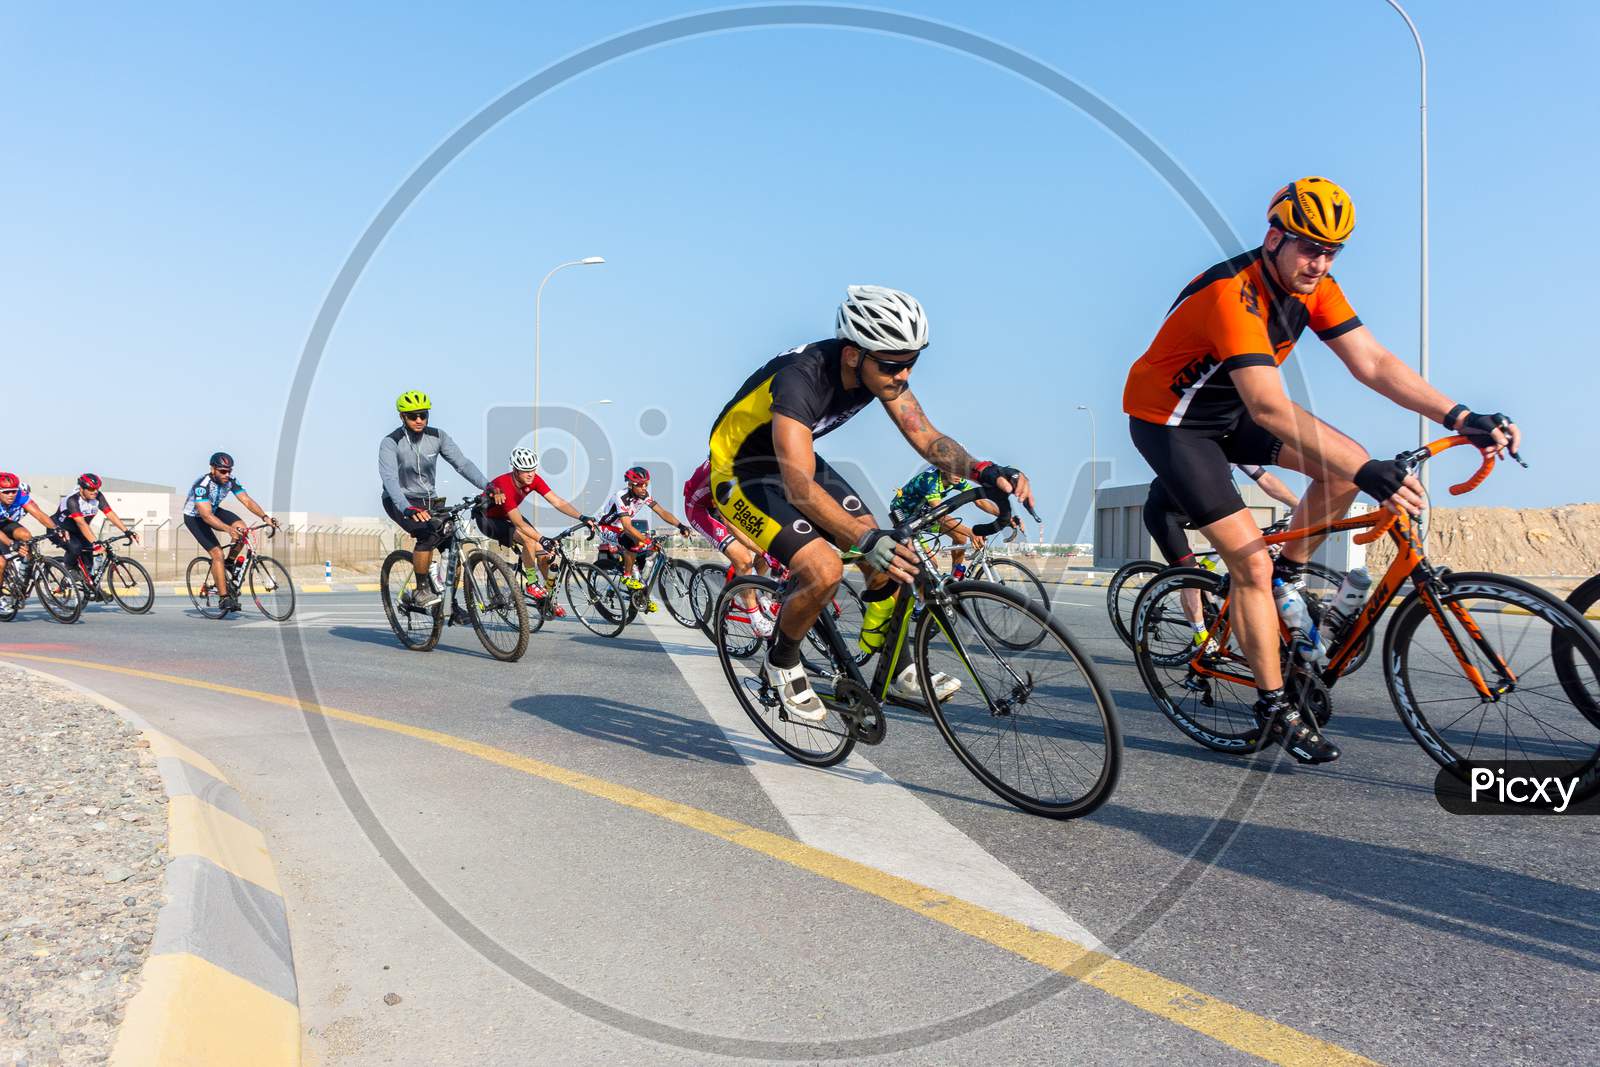 Muscat,Oman 15Th September 2017. Bicycle Racers Riding On The Road Racing Track To Win The Race.